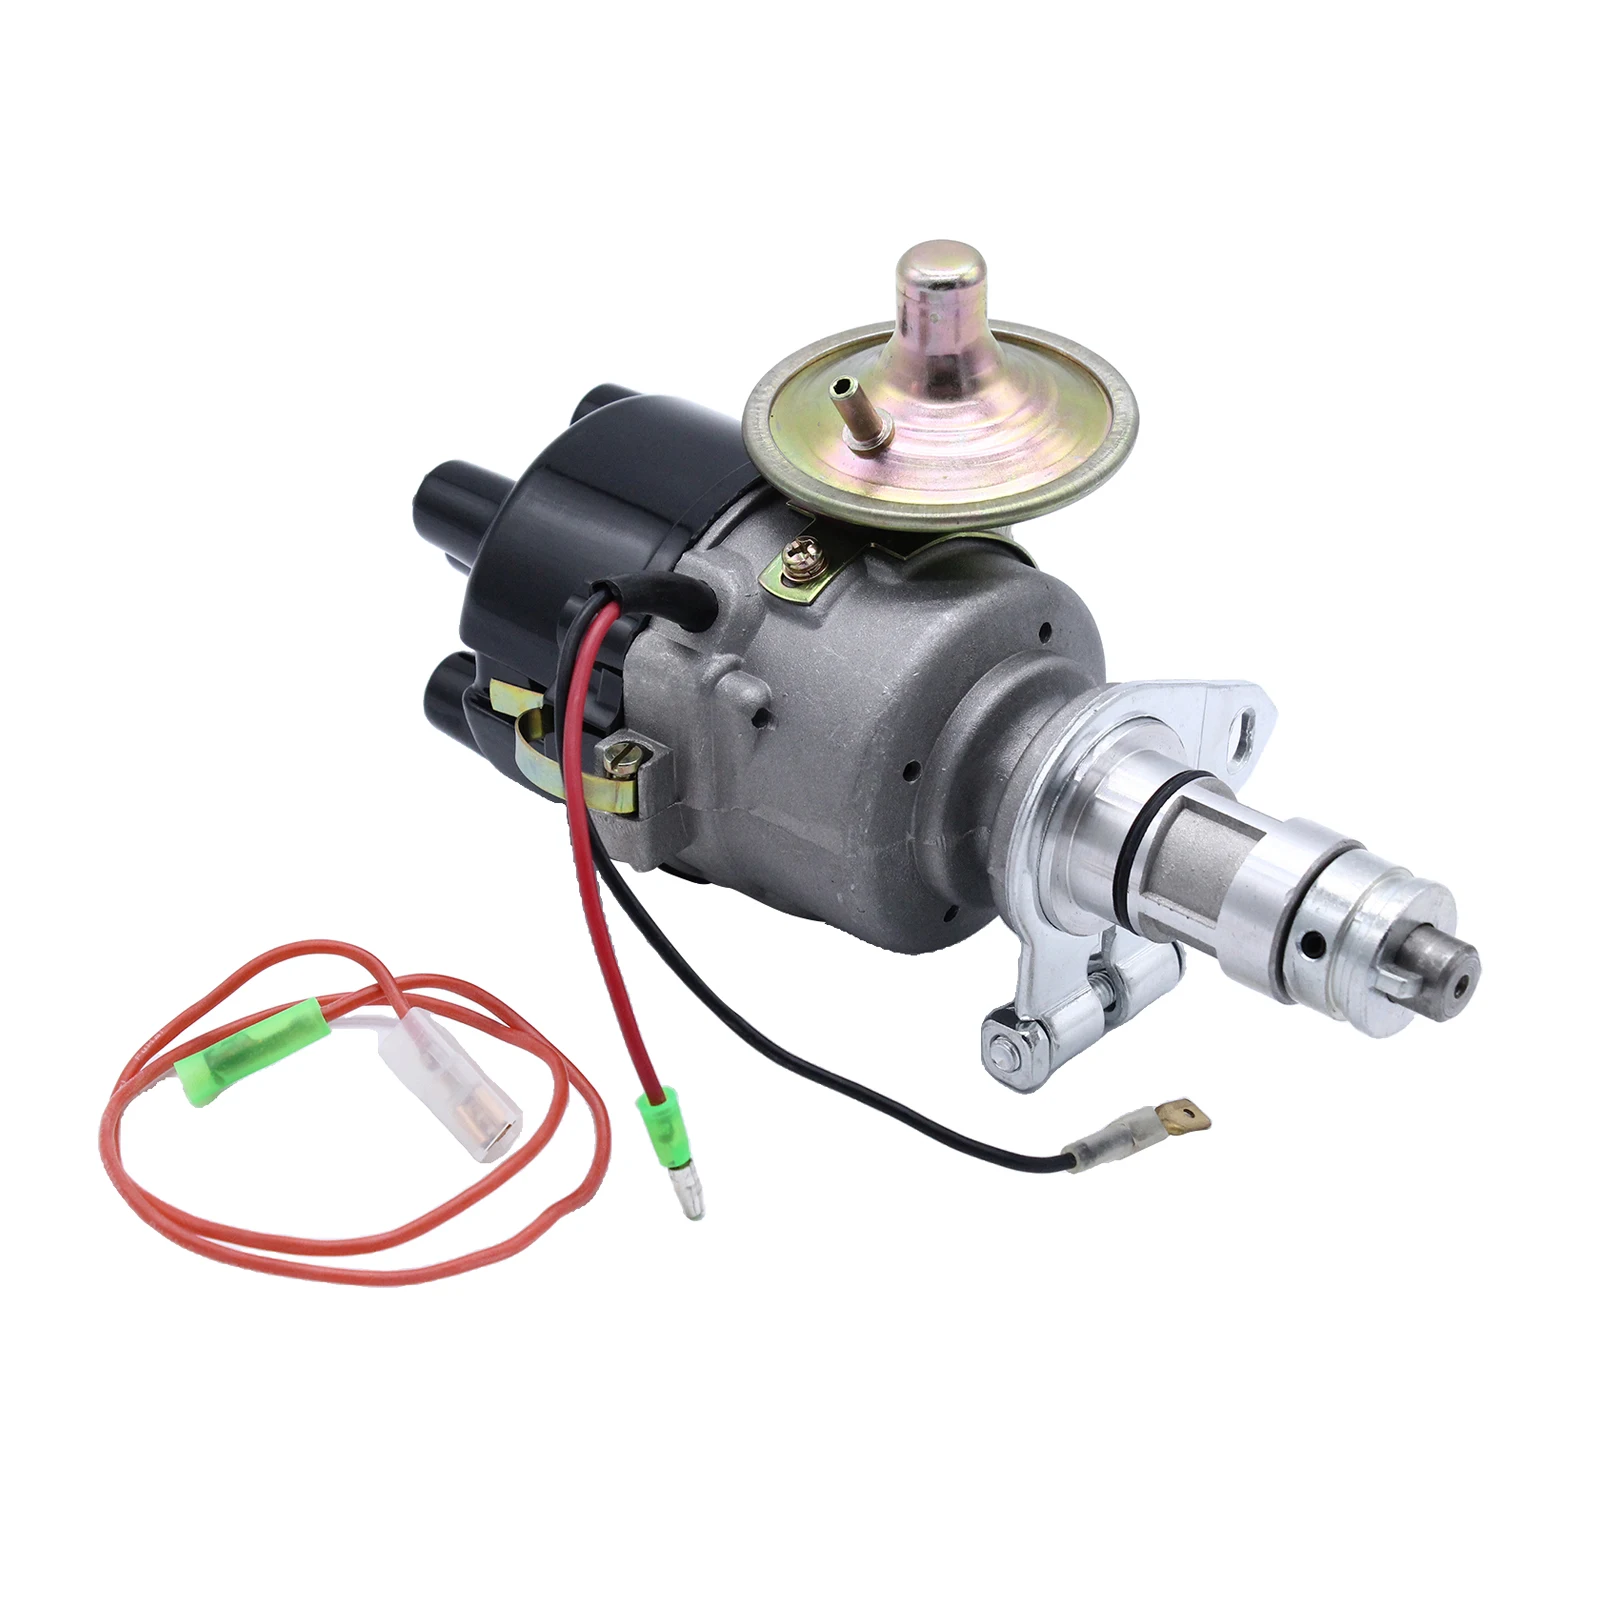 Durable Aluminium Alloy 4 Cylinder Electronic Distributor Replacement for Lucas 45D & 25D